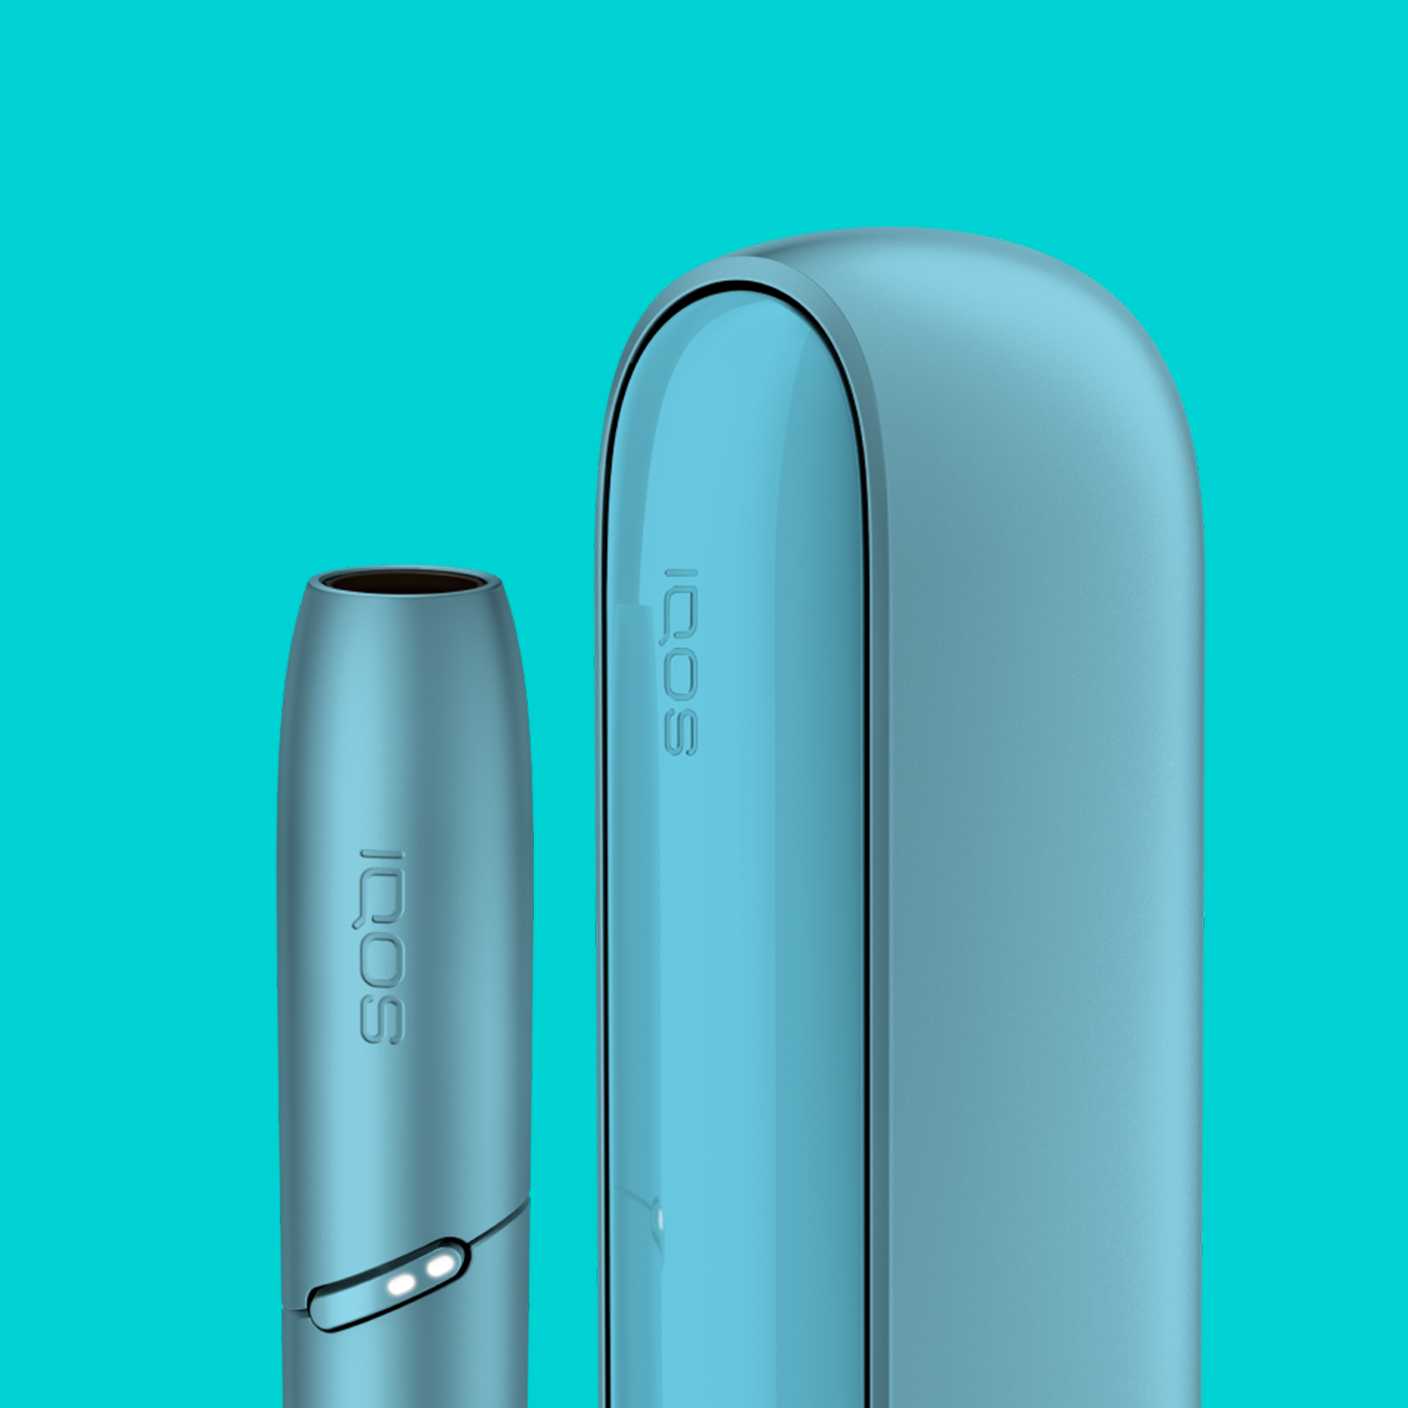 Turquoise IQOS holder and pocket charger